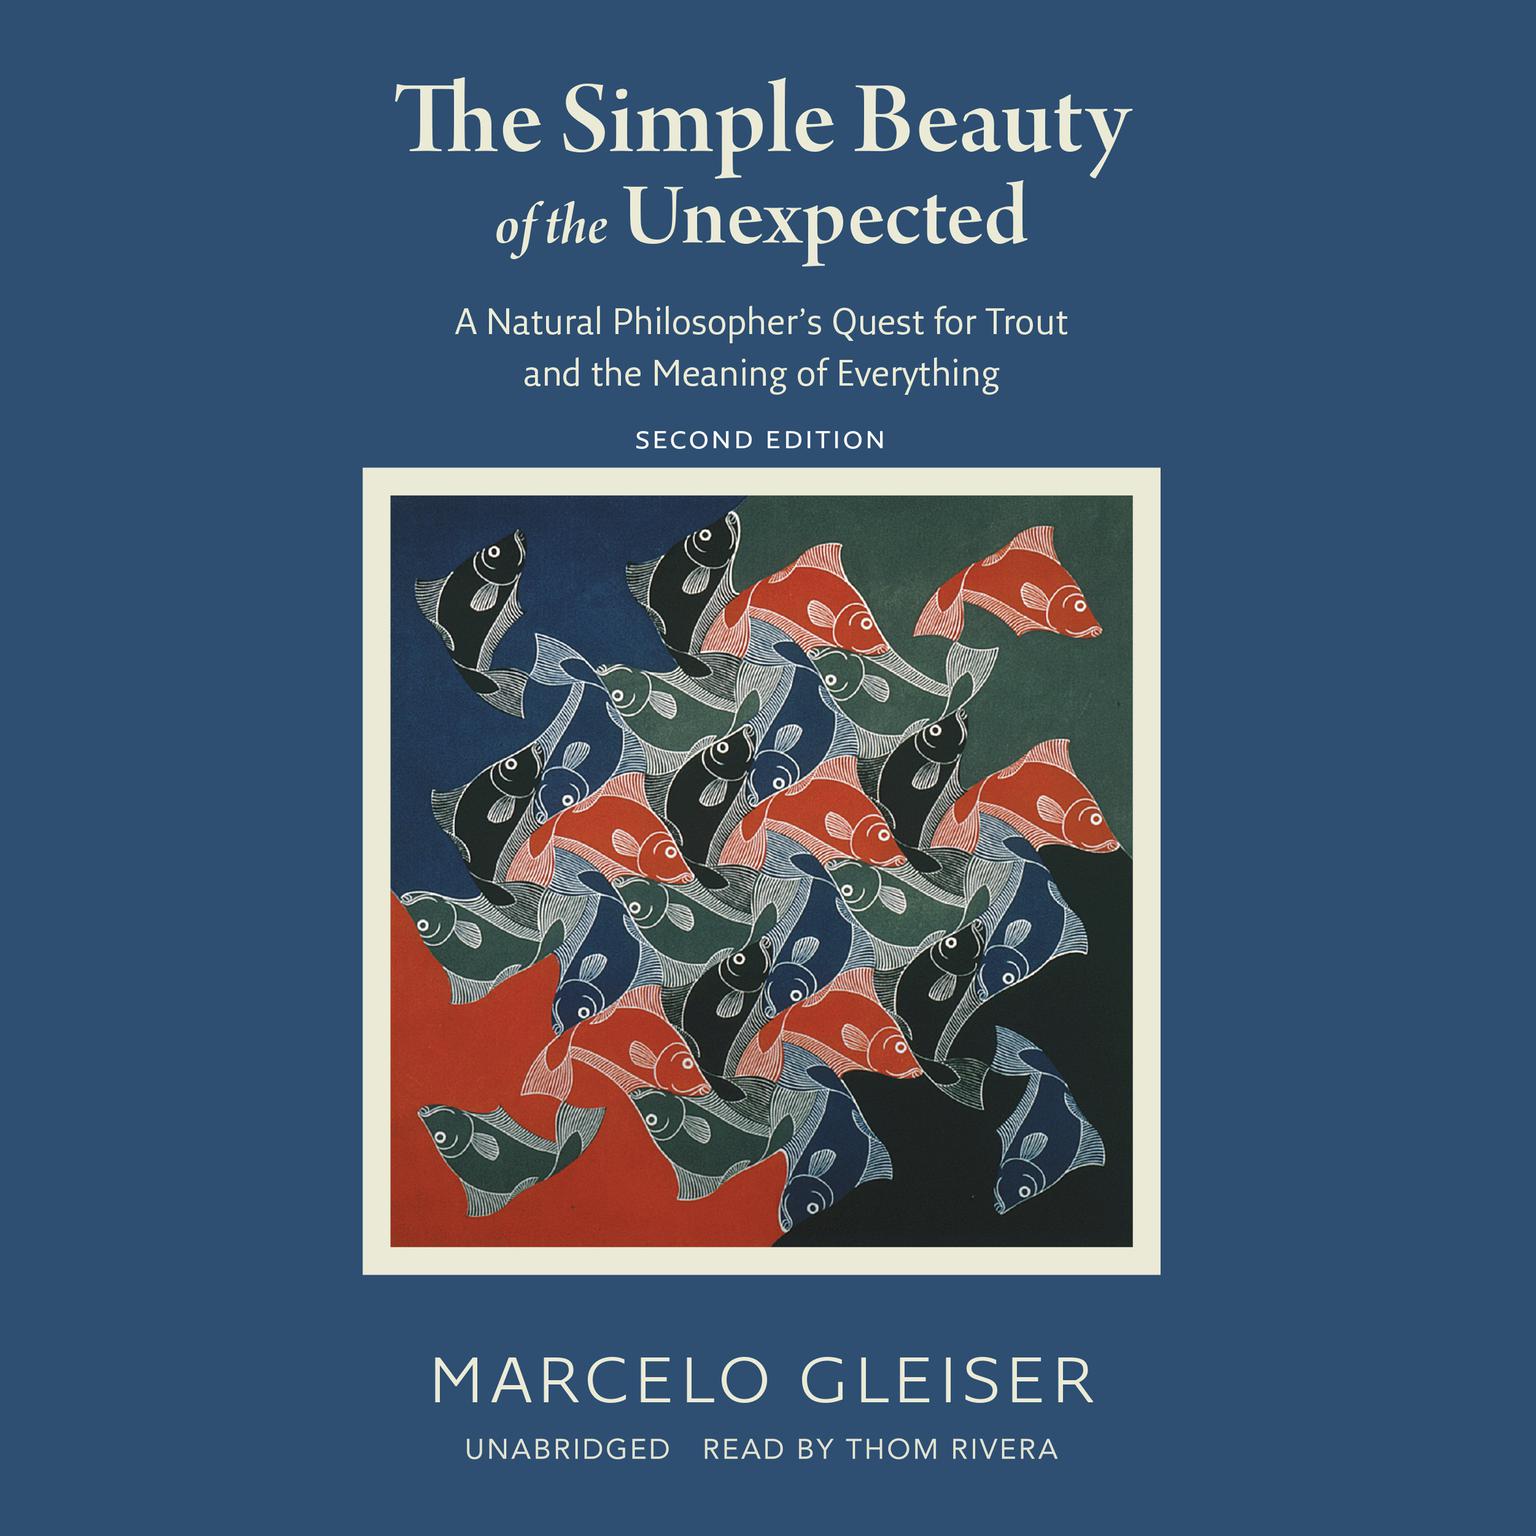 The Simple Beauty of the Unexpected, Second Edition: A Natural Philosopher’s Quest for Trout and the Meaning of Everything Audiobook, by Marcelo Gleiser